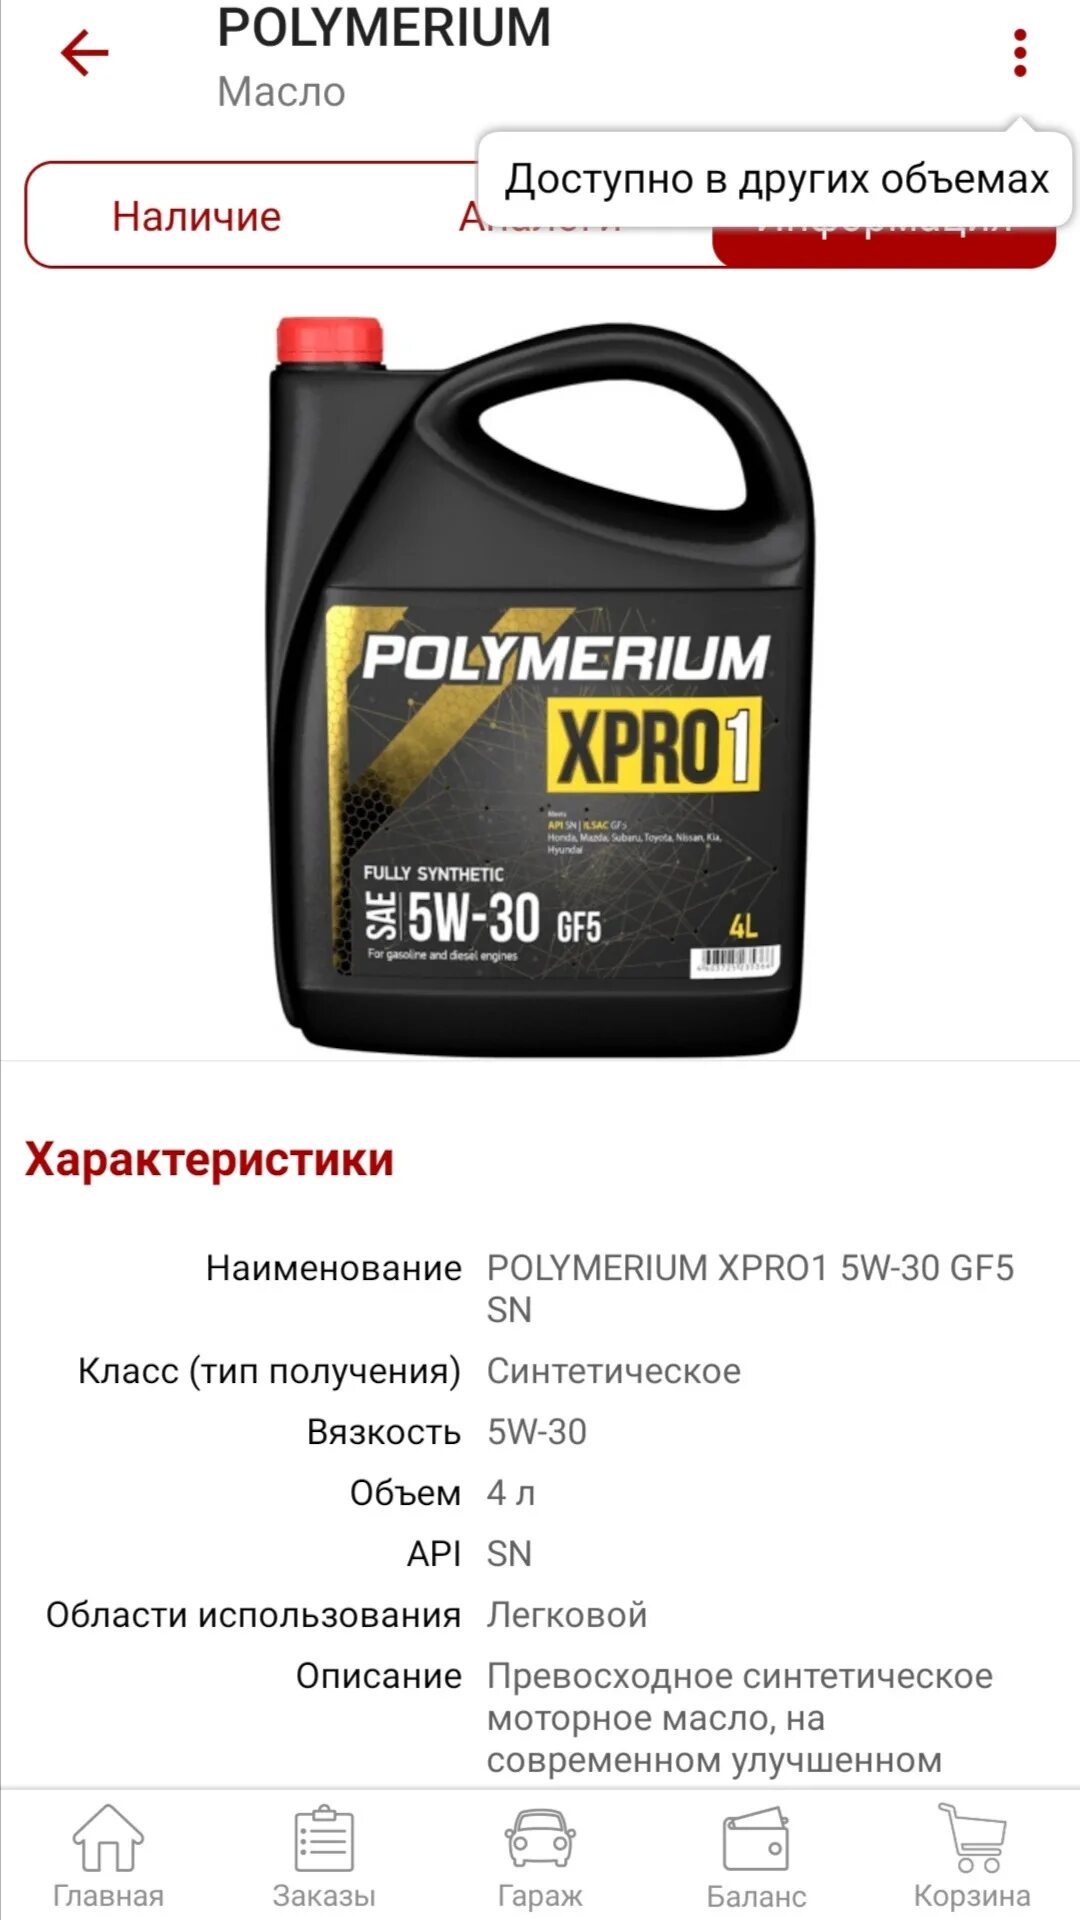 Polymerium xpro2 5w30. Масло полимериум 5w30. Масло полимериум 5w30 SG. Масло Polymerium 5w40 допуски. Масло полимериум анализ